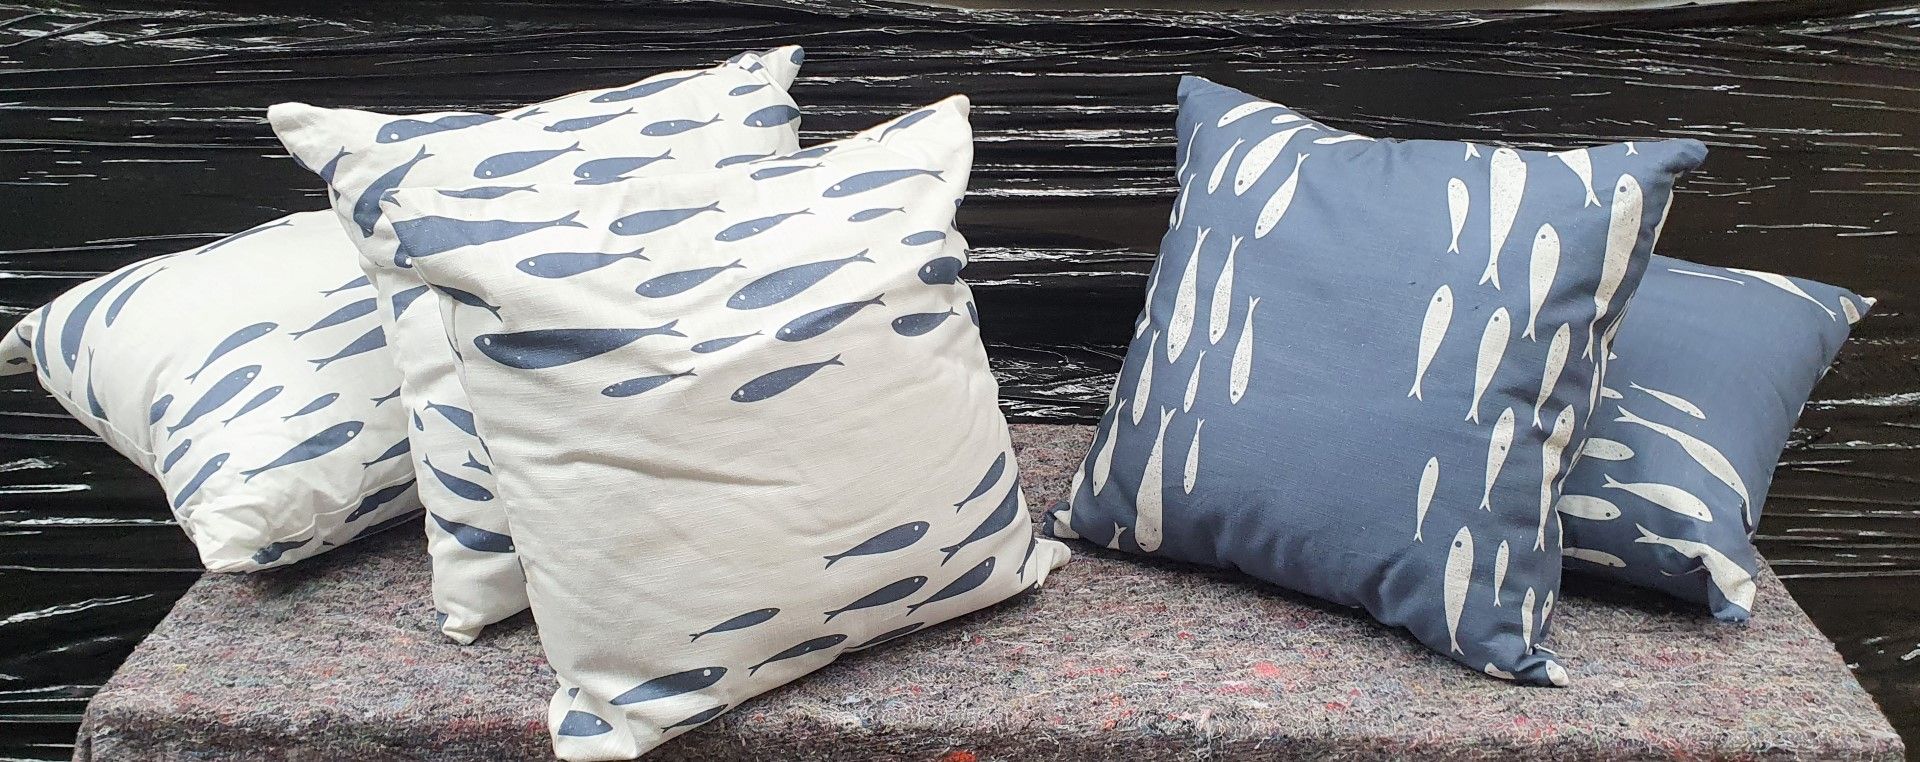 12 x Assorted Scatter Cushions by Seakiss - Approx Size 40 x 40 cms - New Stock - Ref: TCH268 -